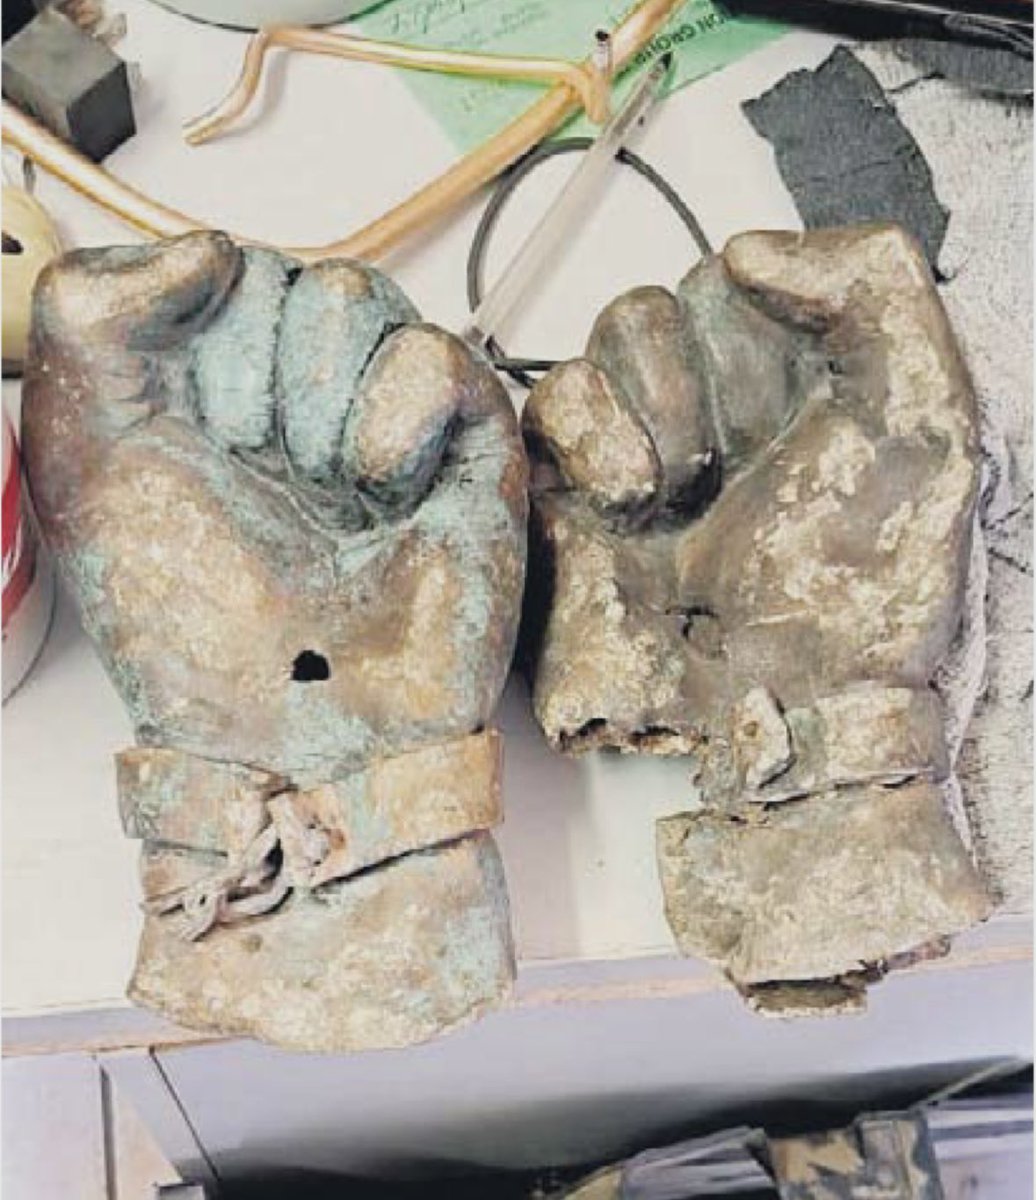 Steve Biko’s tombstone has been vandalised/desecrated. The two bronze fists were found at a scrapyard. They had been sold for R190. (The Citizen report)